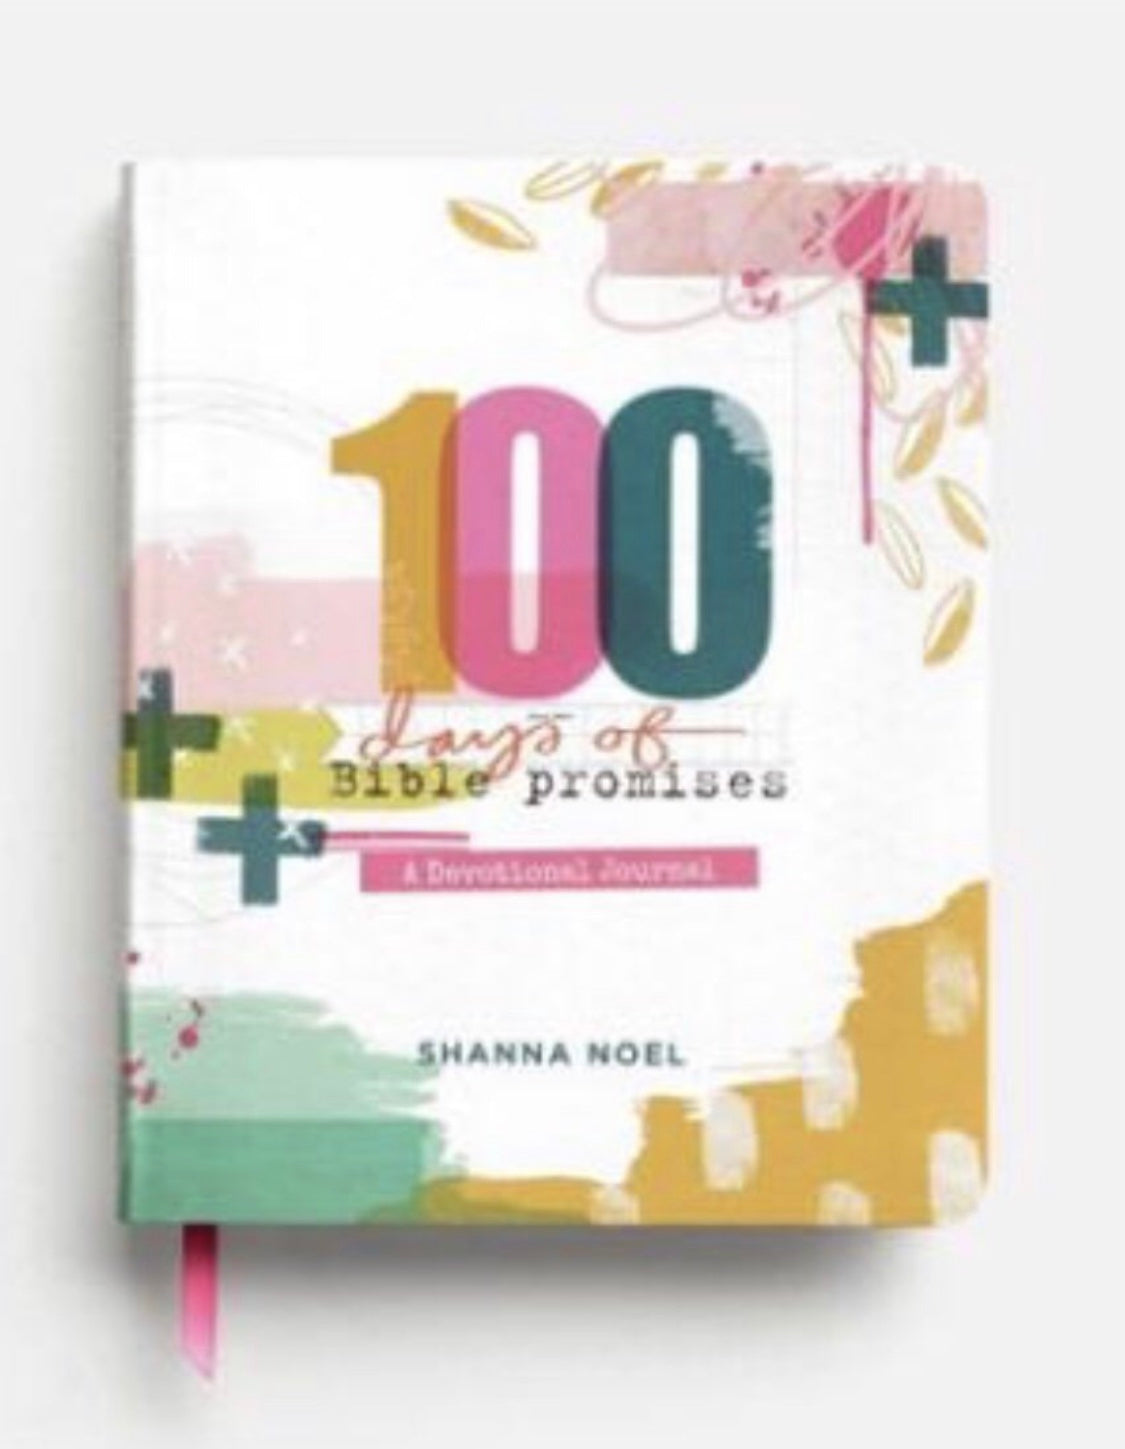 100 days of Bible Promises by Shanna Noel